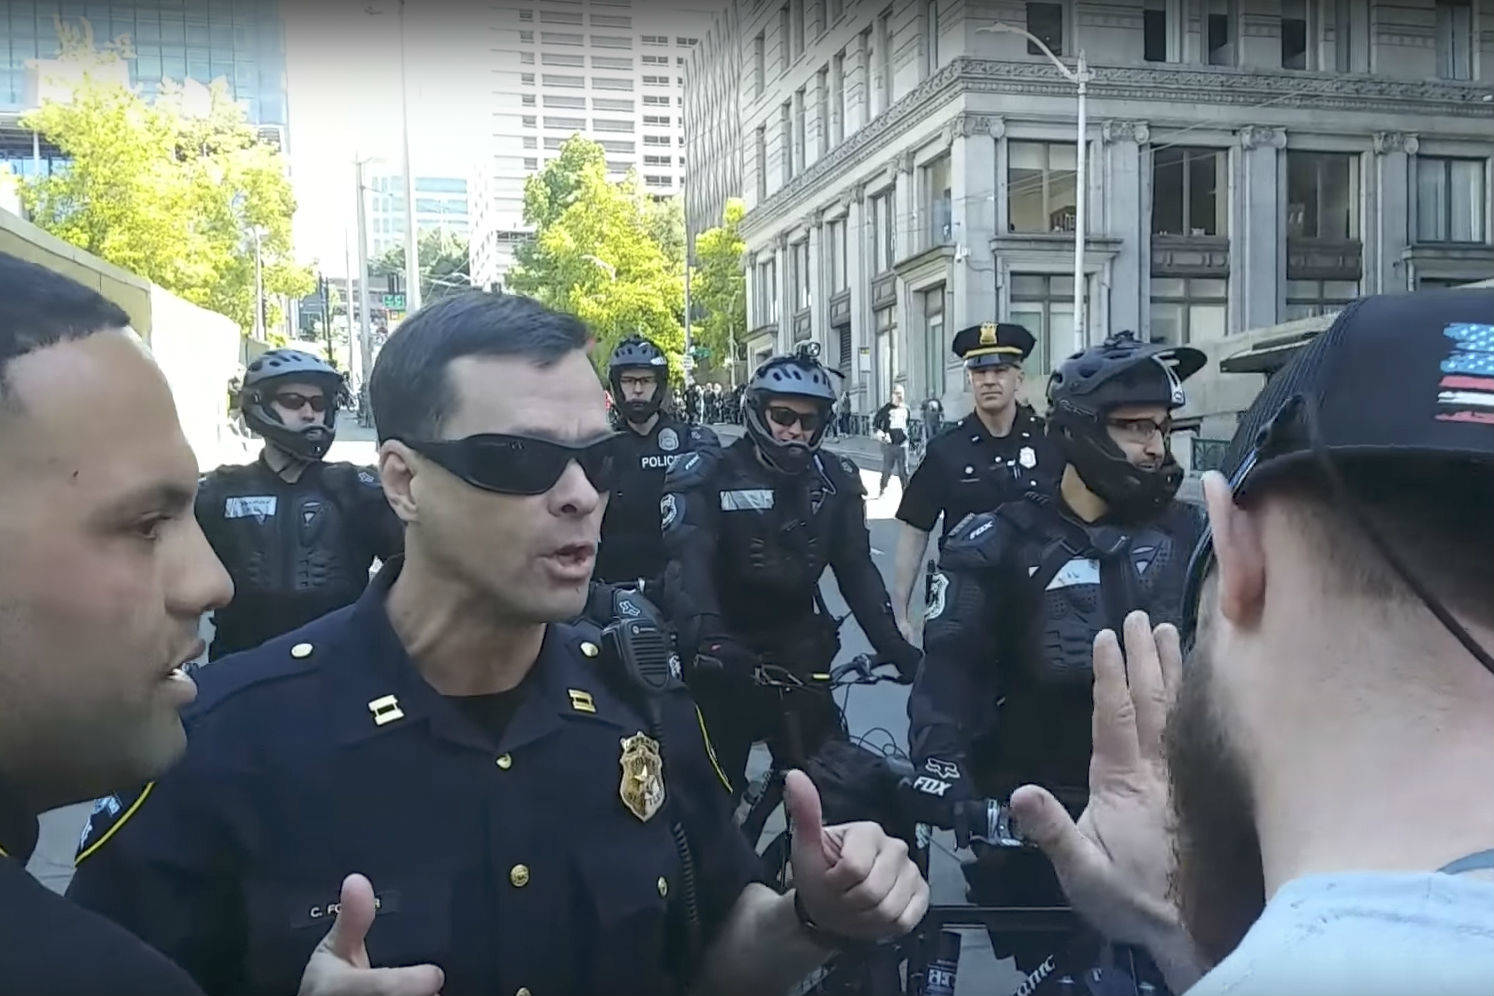 Cpt. Chris Fowler threatens to arrest two “anti-sharia” demonstrators for incitement. Screenshot via footage by Casey Jaywork